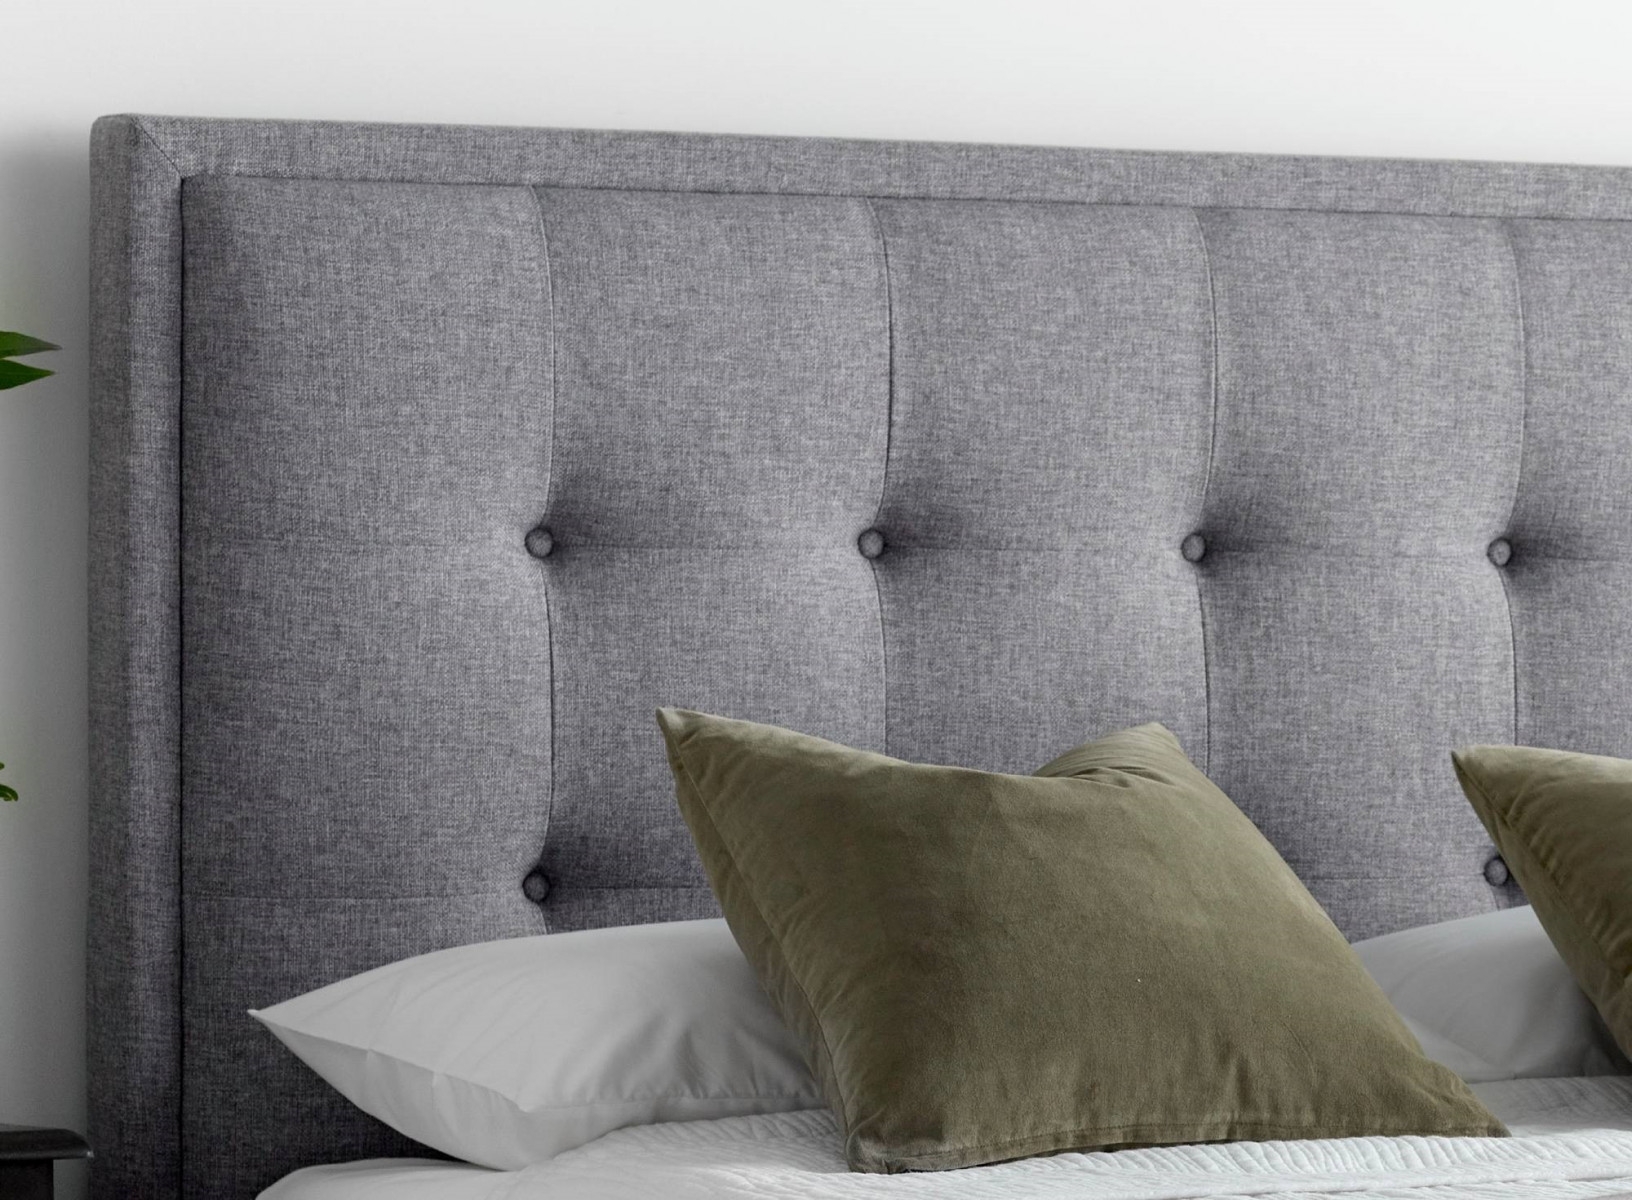 Product photograph of Kaydian Falmer Marbella Grey Fabric Ottoman Storage Tv Bed from Choice Furniture Superstore.